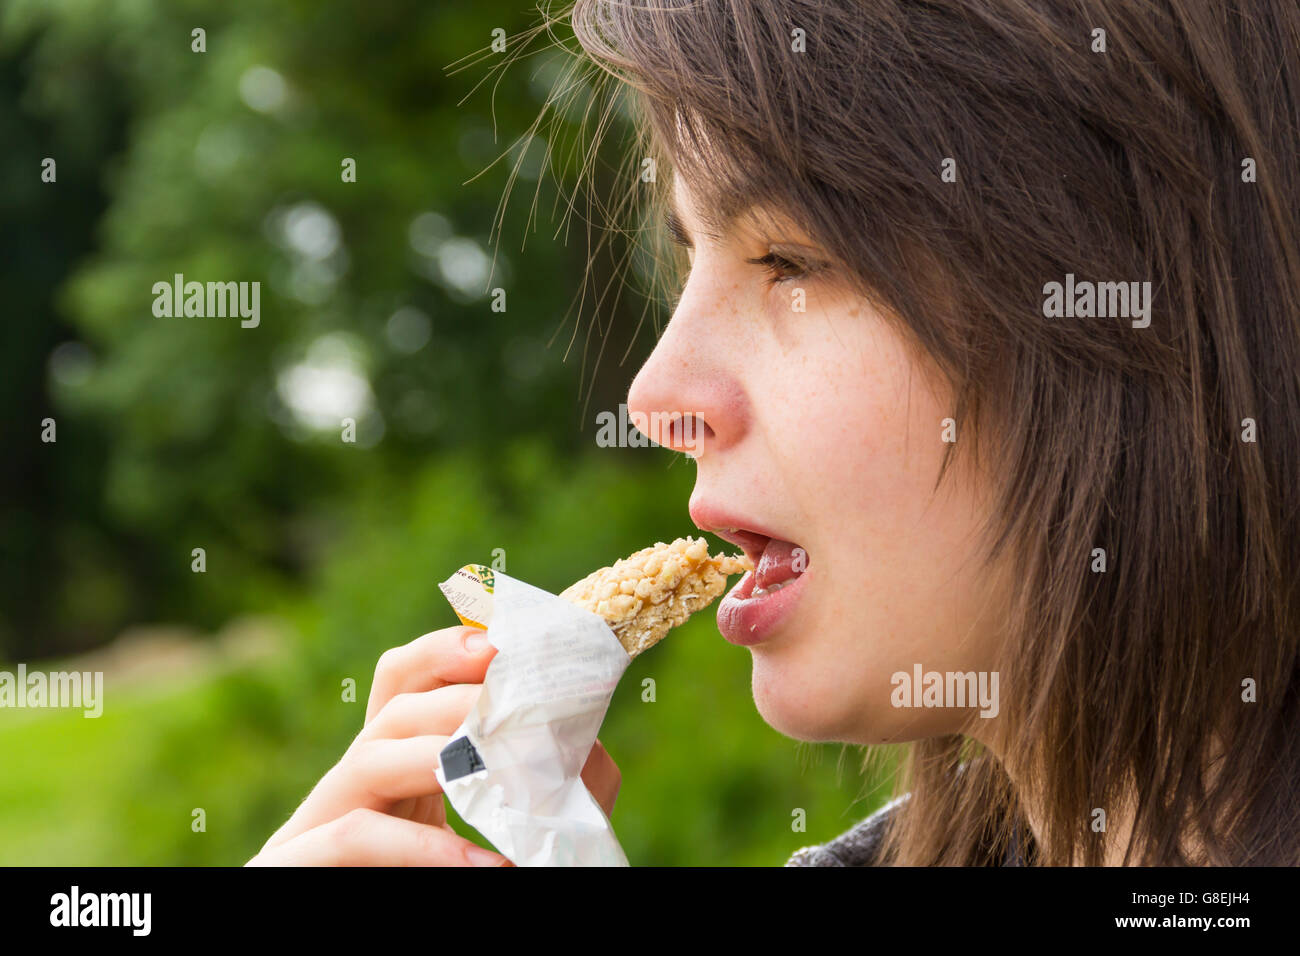 Young woman, adult or late teens, headshot side view in a park eating a cereal bar. Stock Photo